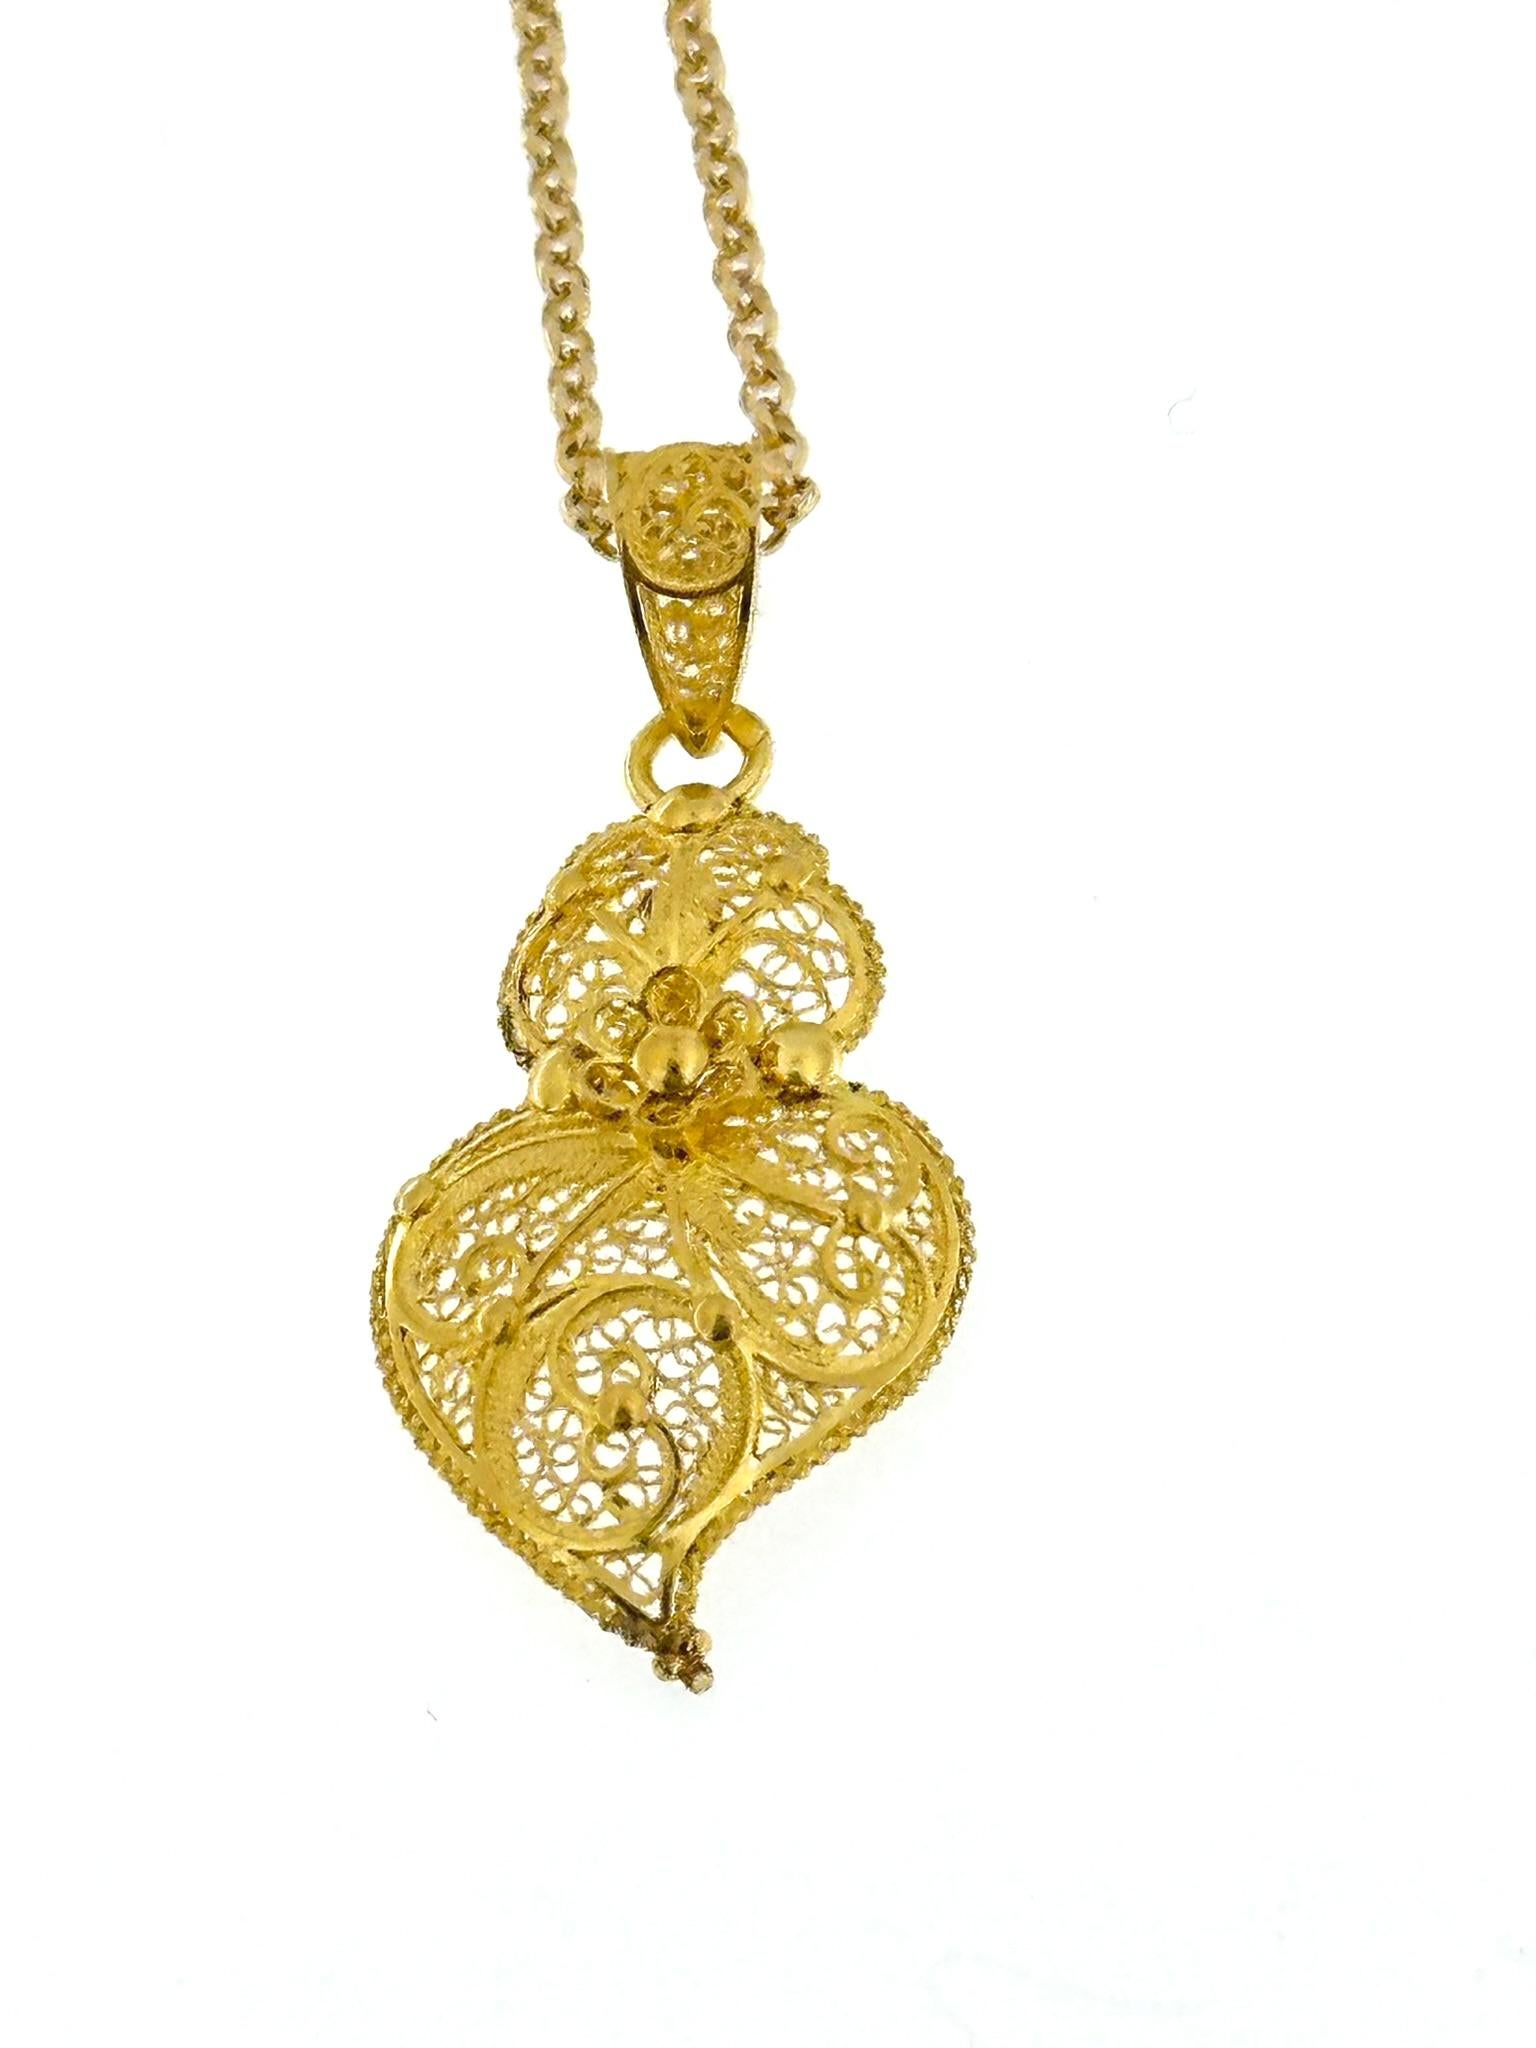 Artisan Original Portuguese Viana's Heart with Chain Yellow Gold  For Sale